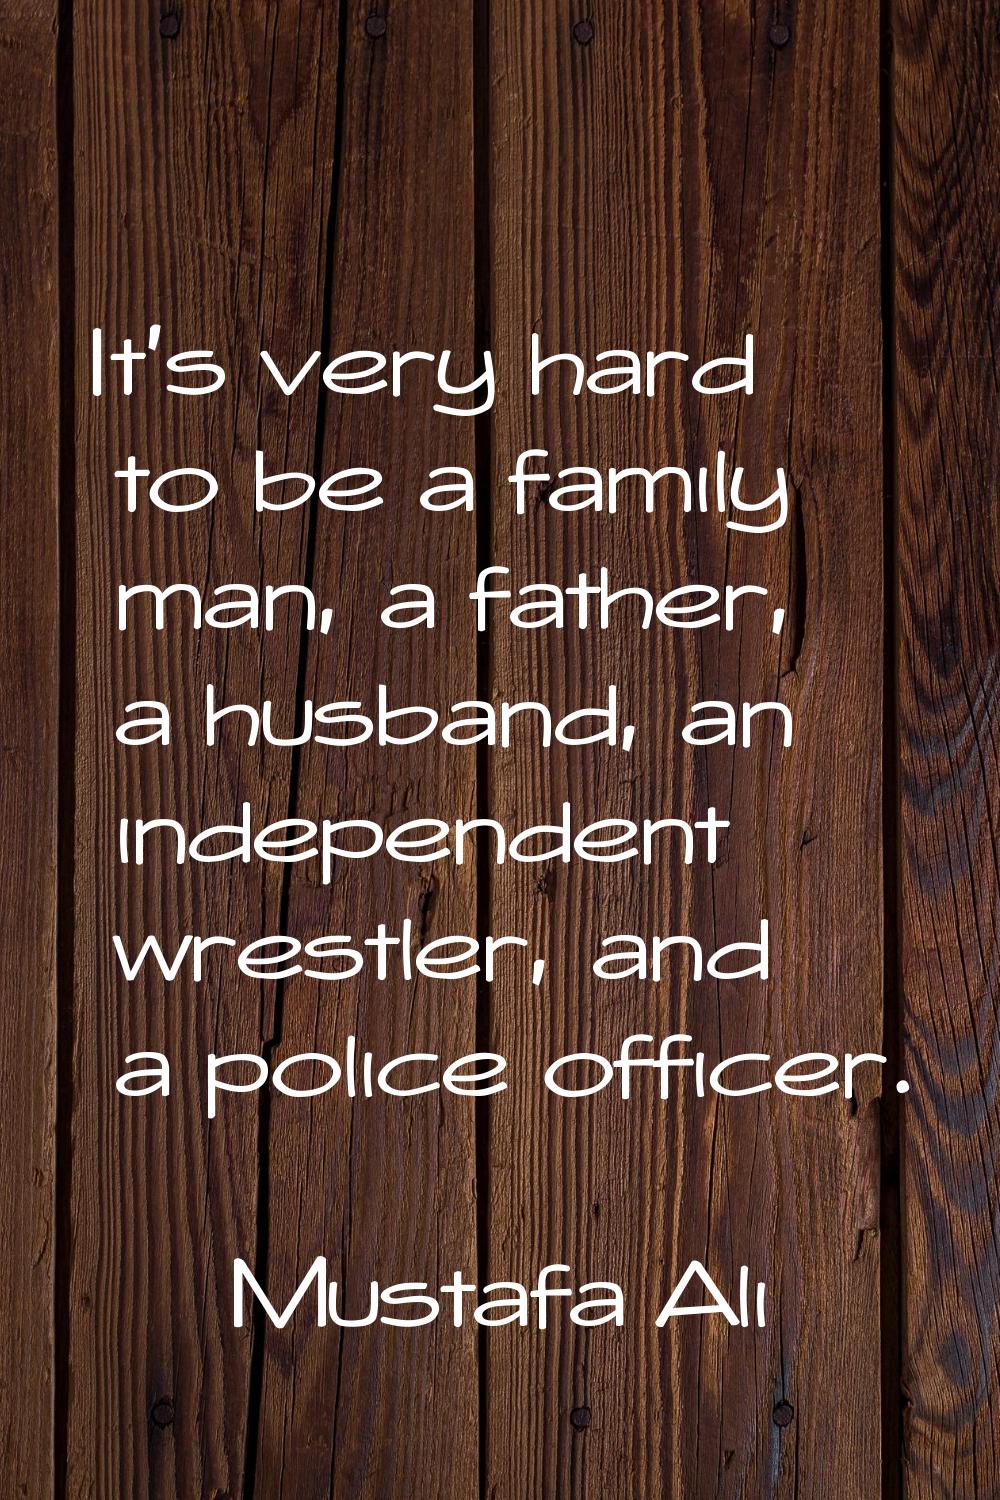 It's very hard to be a family man, a father, a husband, an independent wrestler, and a police offic